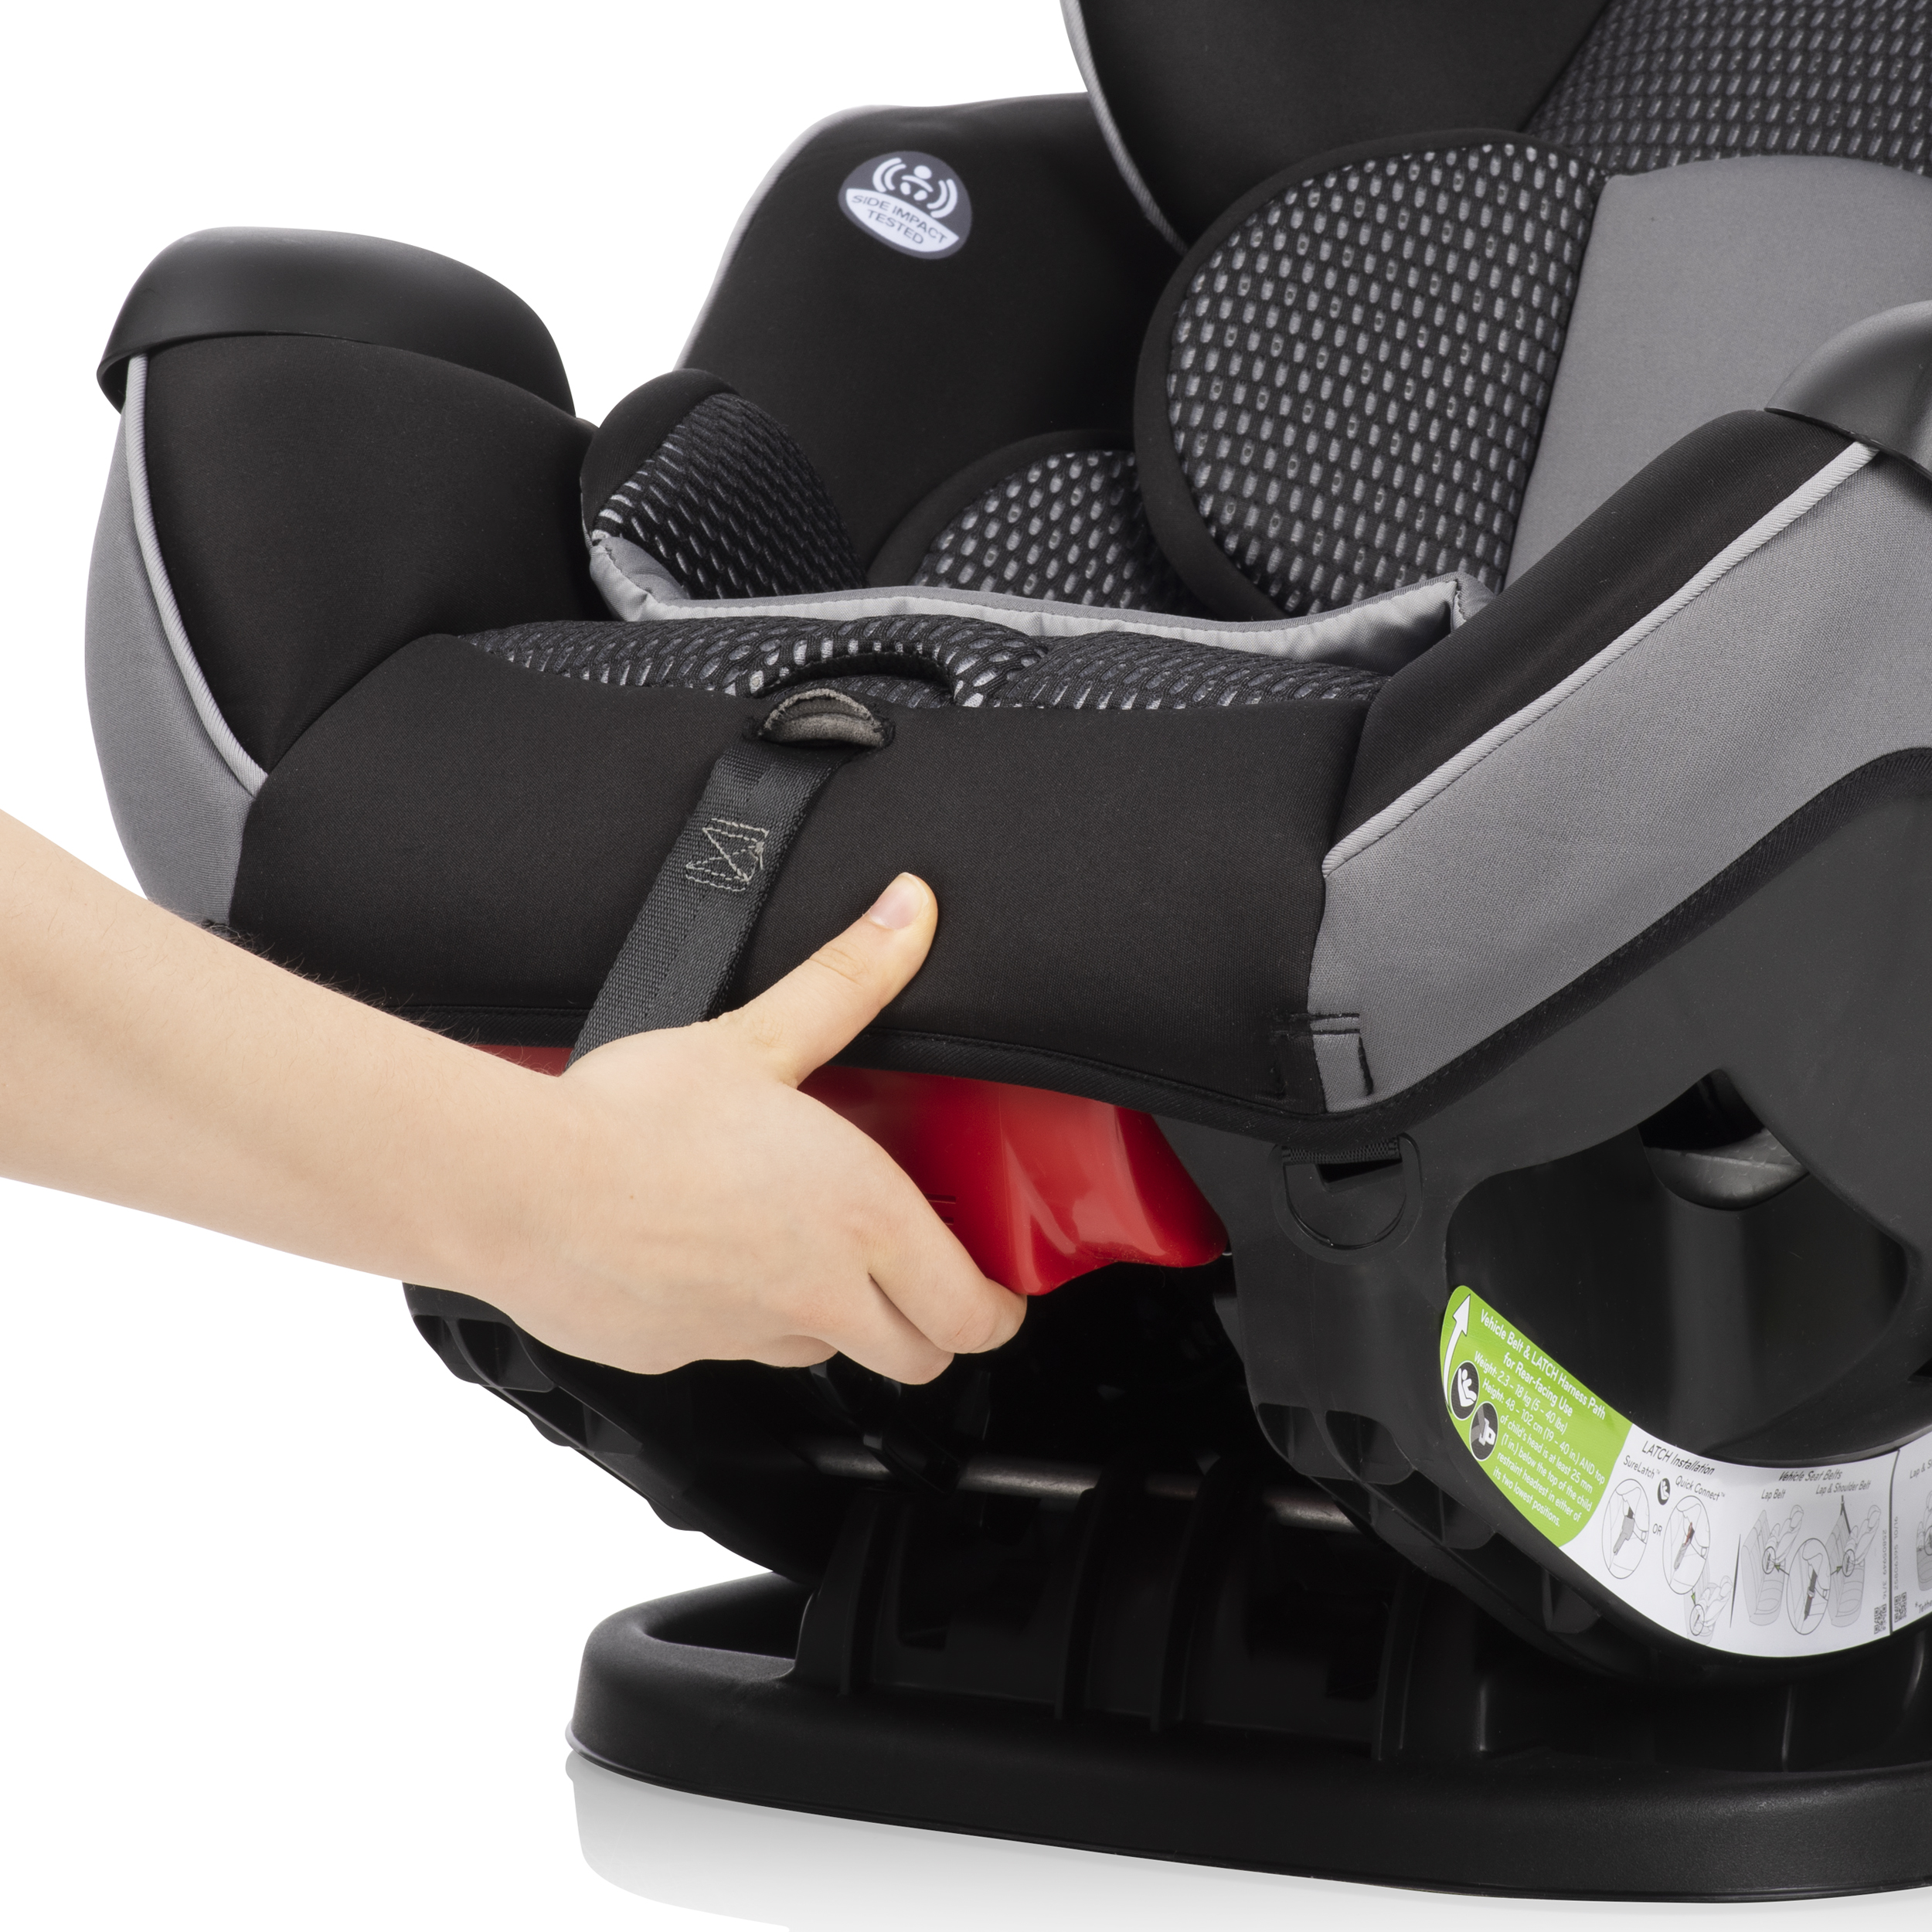 Symphony Sport All-In-One Convertible Car Seat